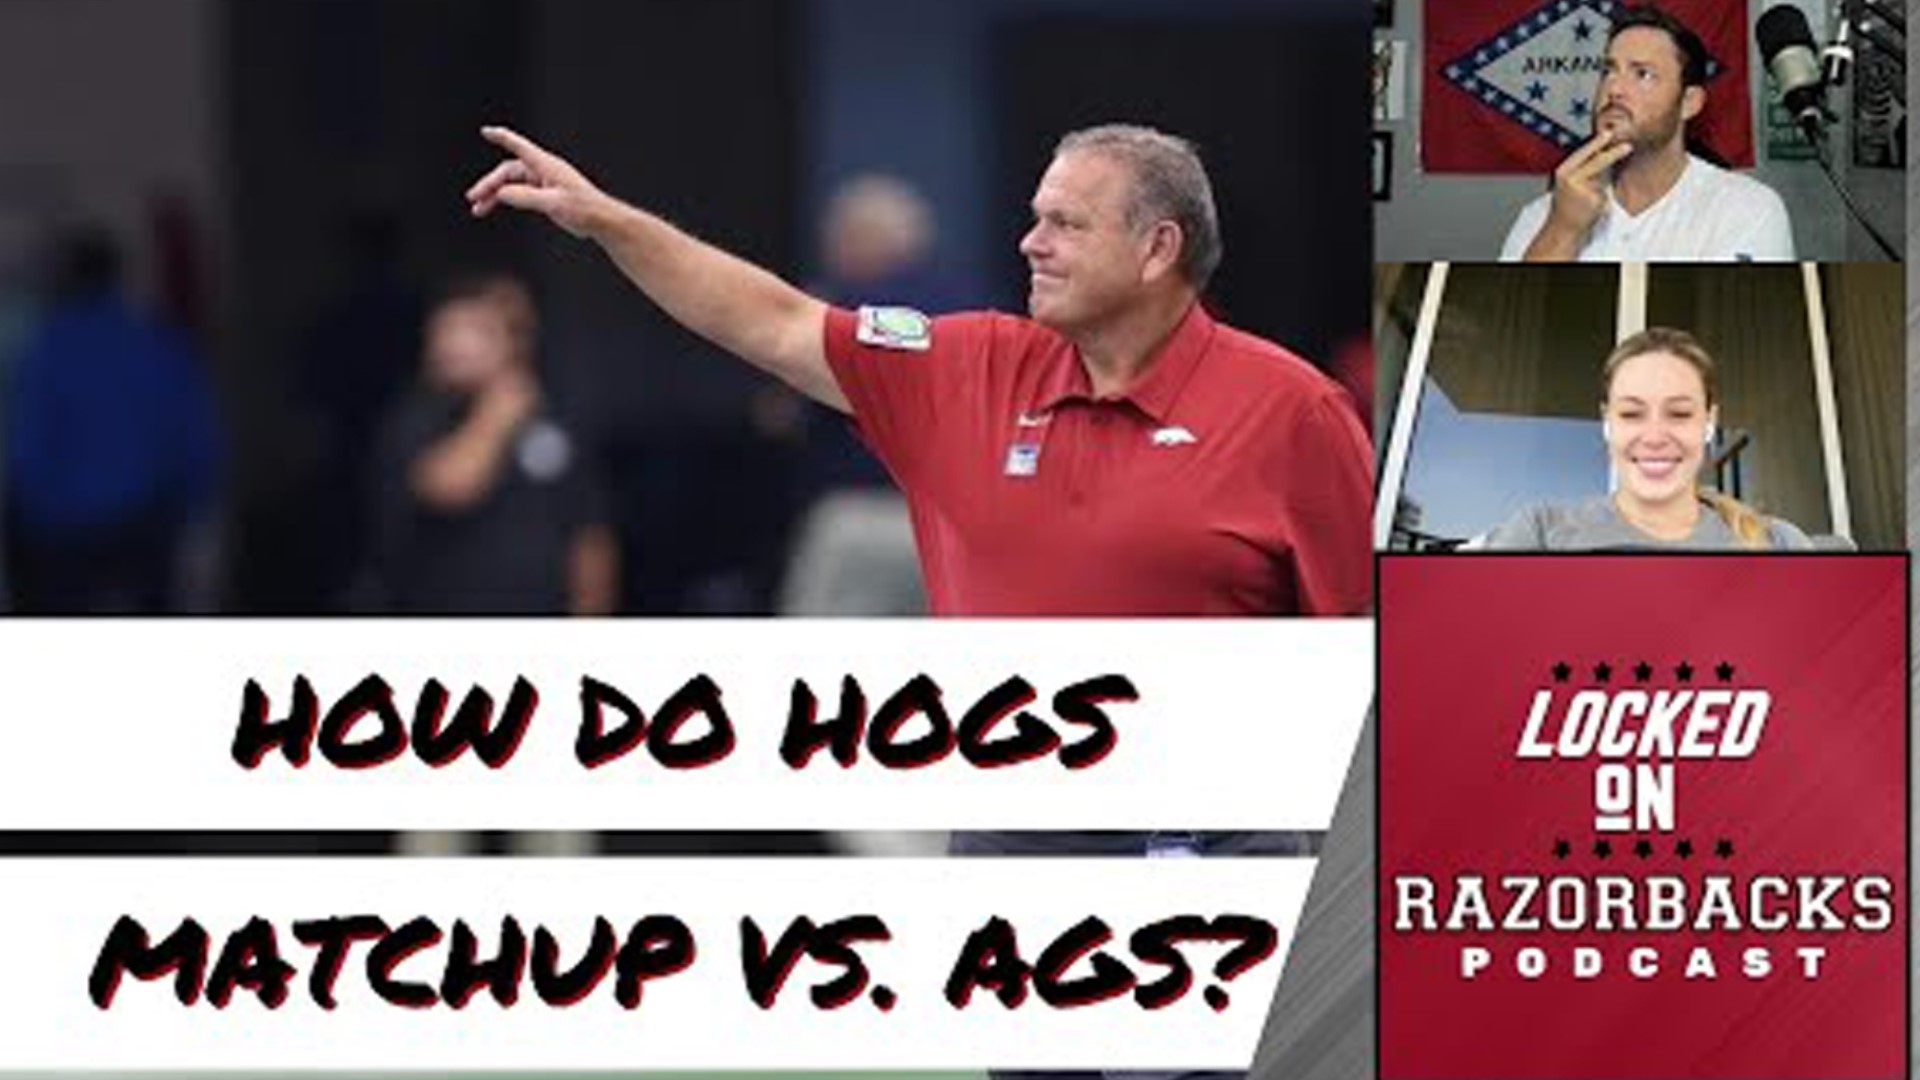 John Nabors talks about the important matchups between the Razorbacks & the Aggies and should the game continue in Arlington at Jerry Jones' Stadium.